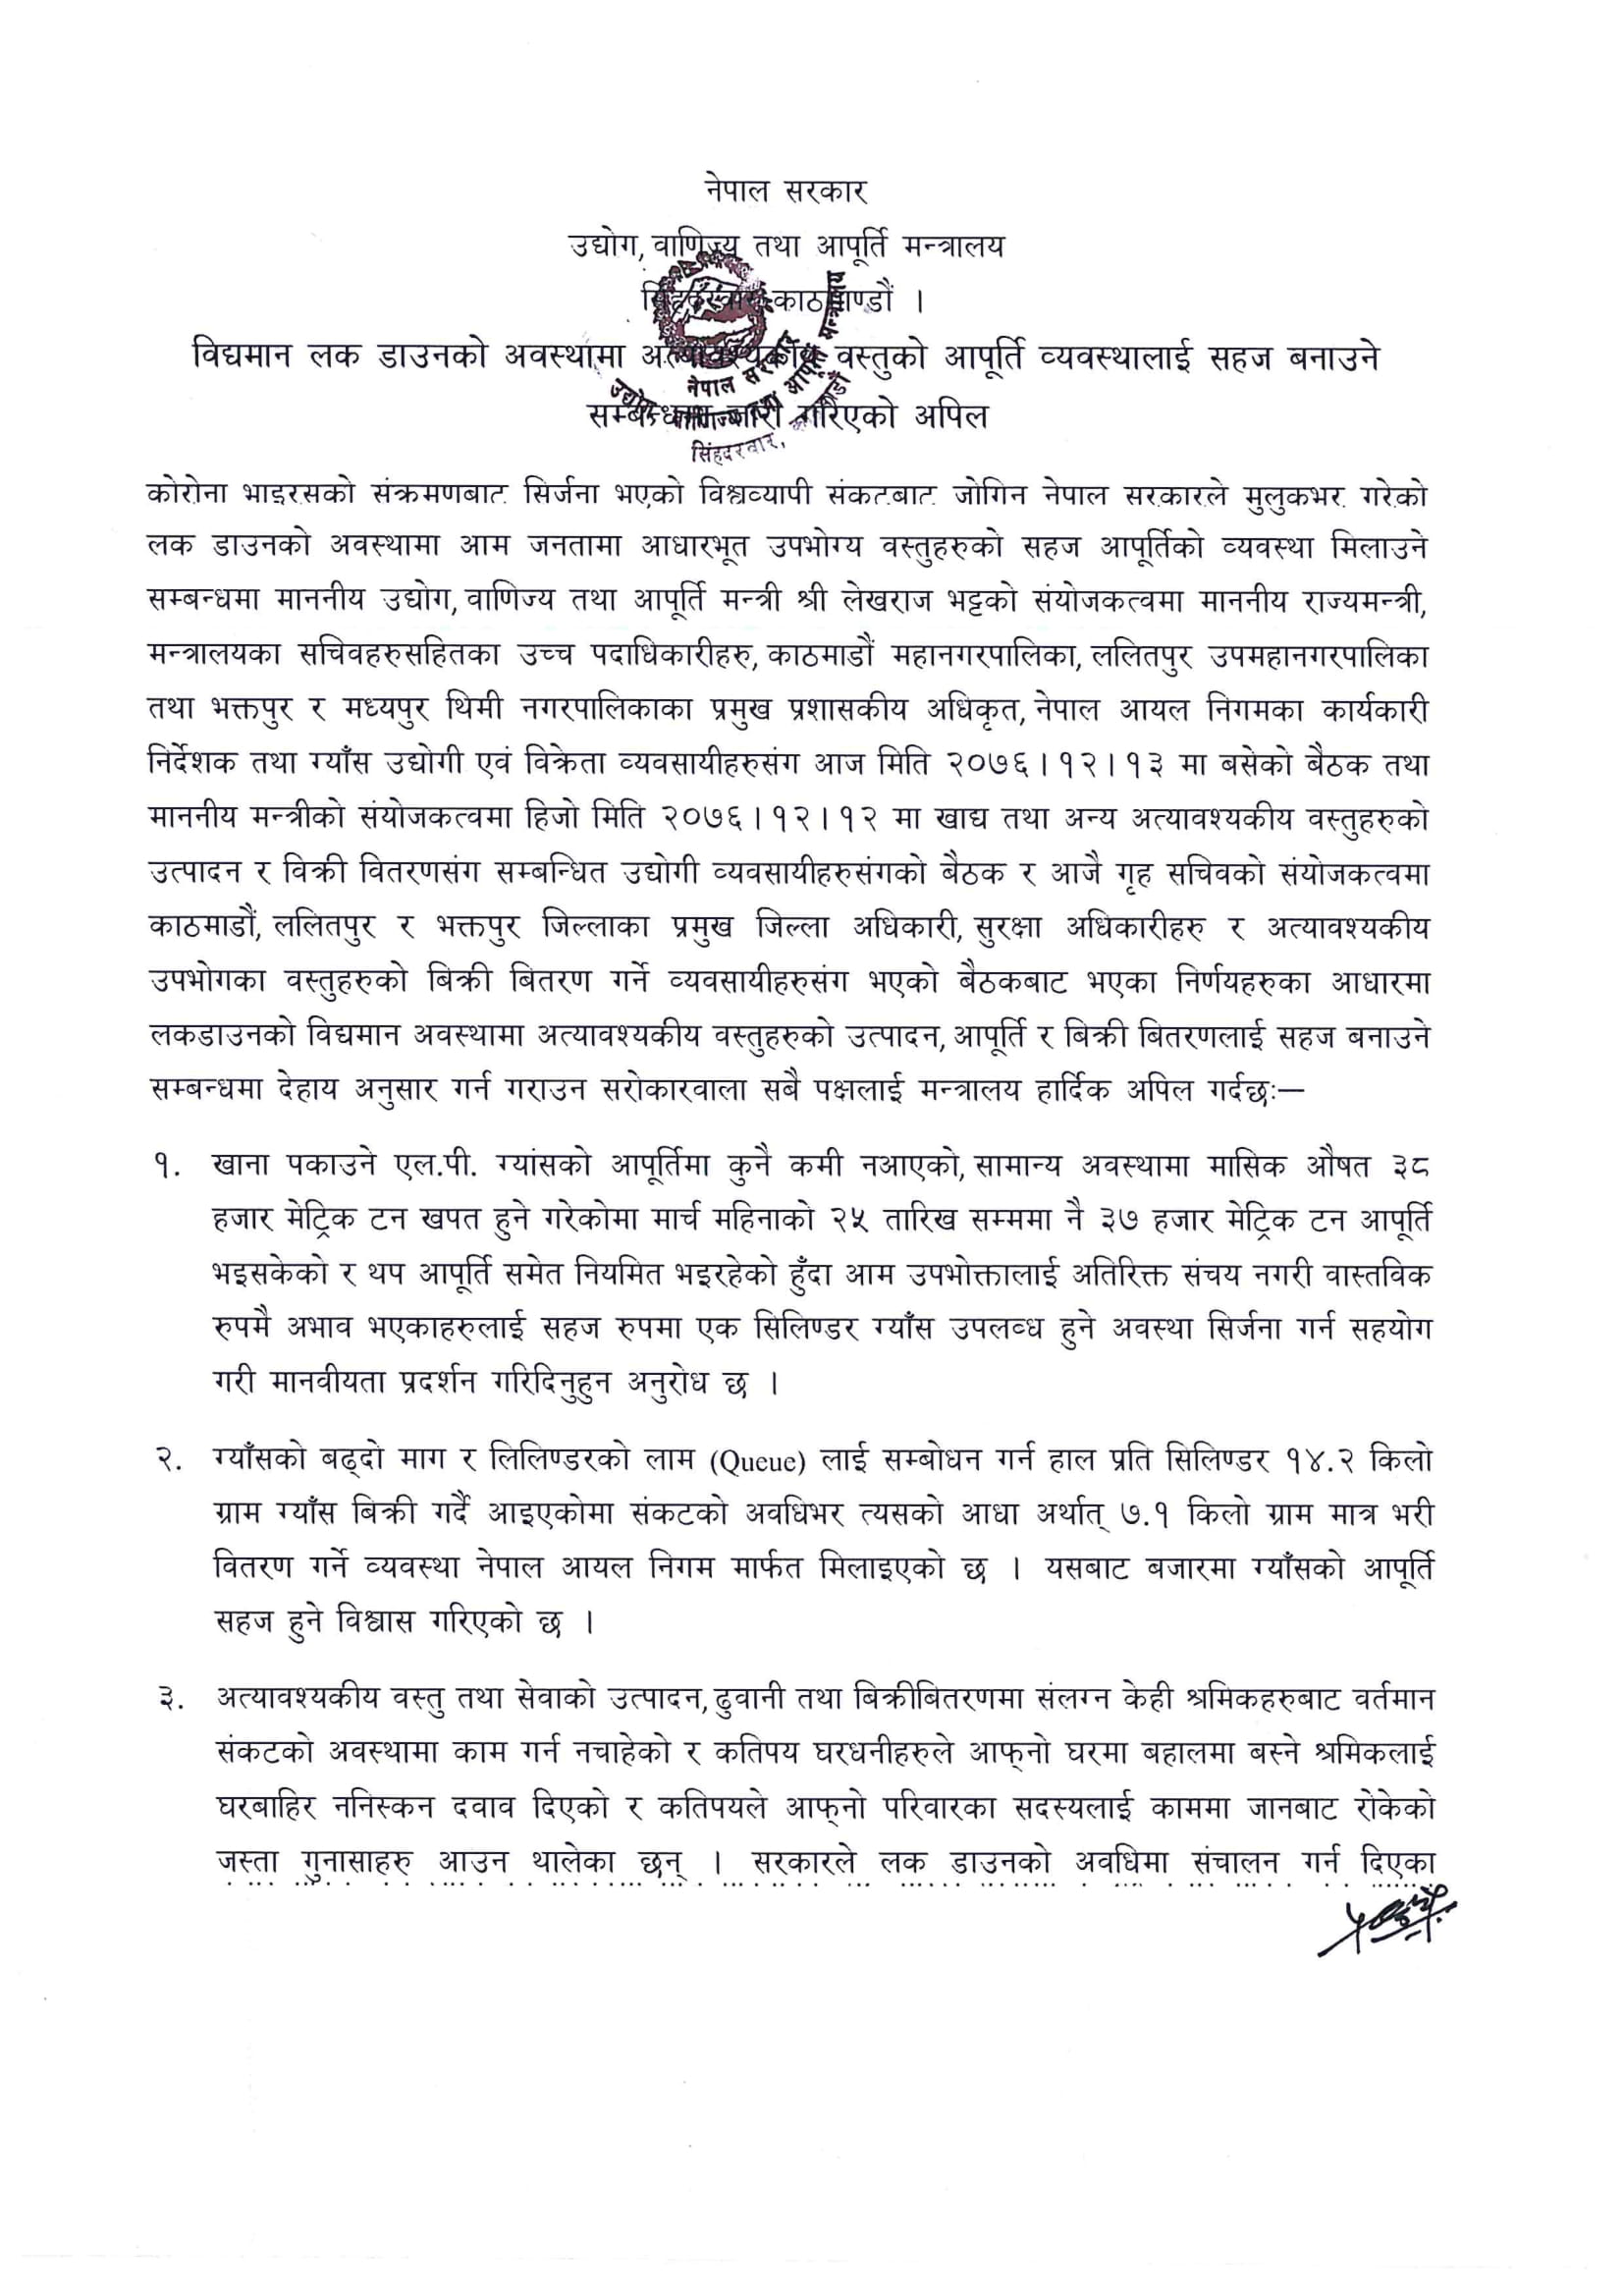 Press Release on Facilitating the Supply of Essential Goods in the Time of Existing Lock Down.